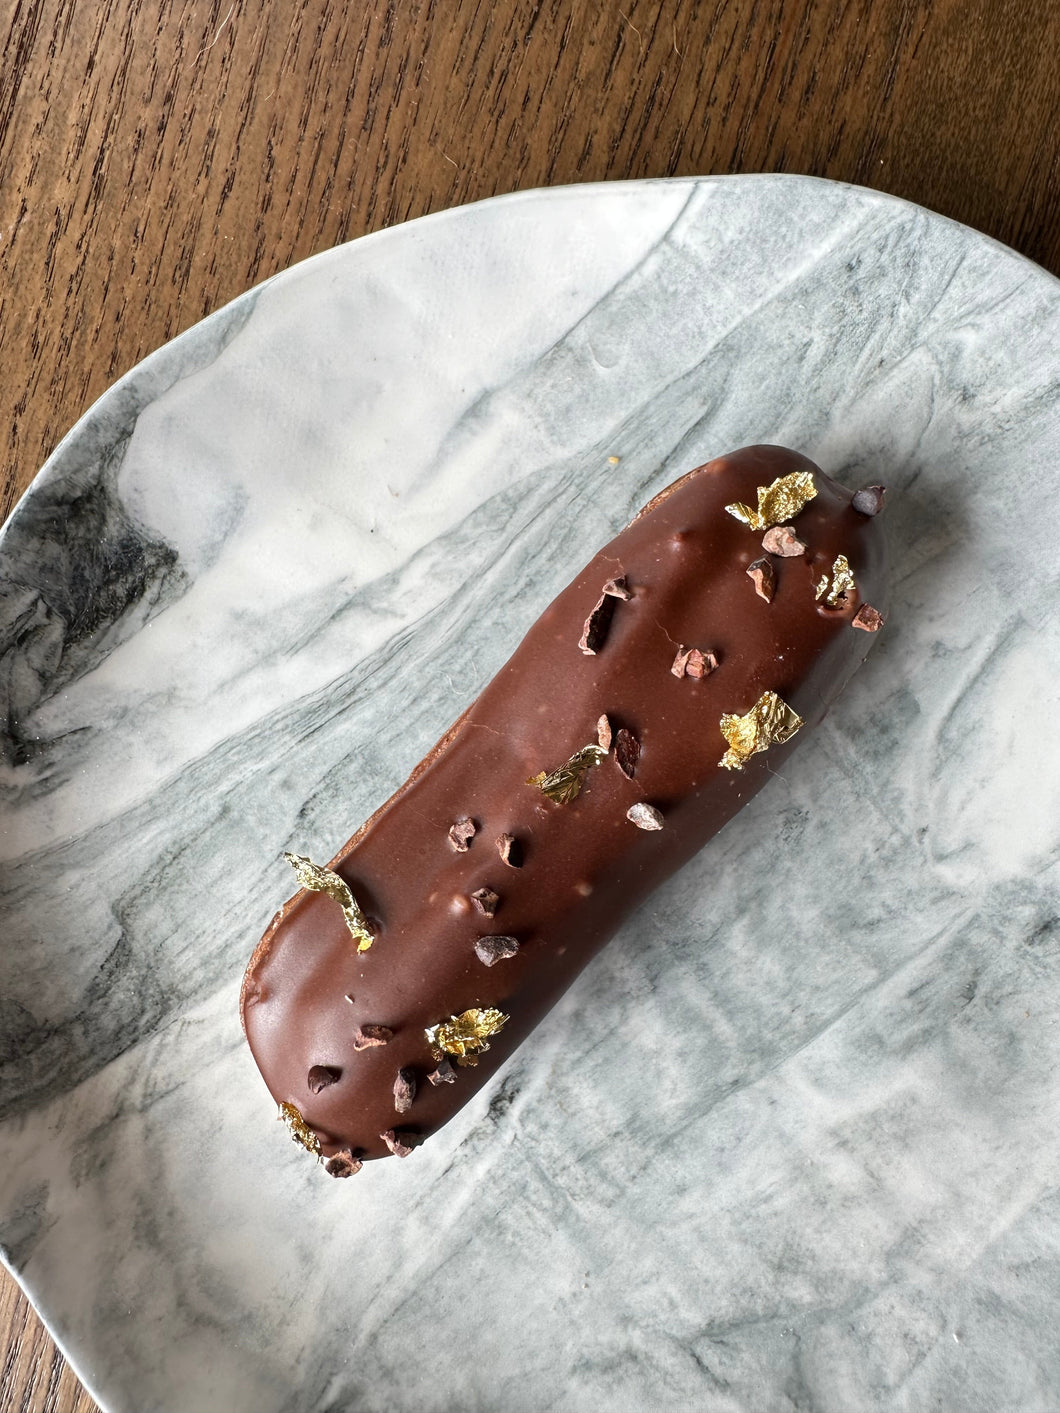 In person class - chocolate eclair - 2/6